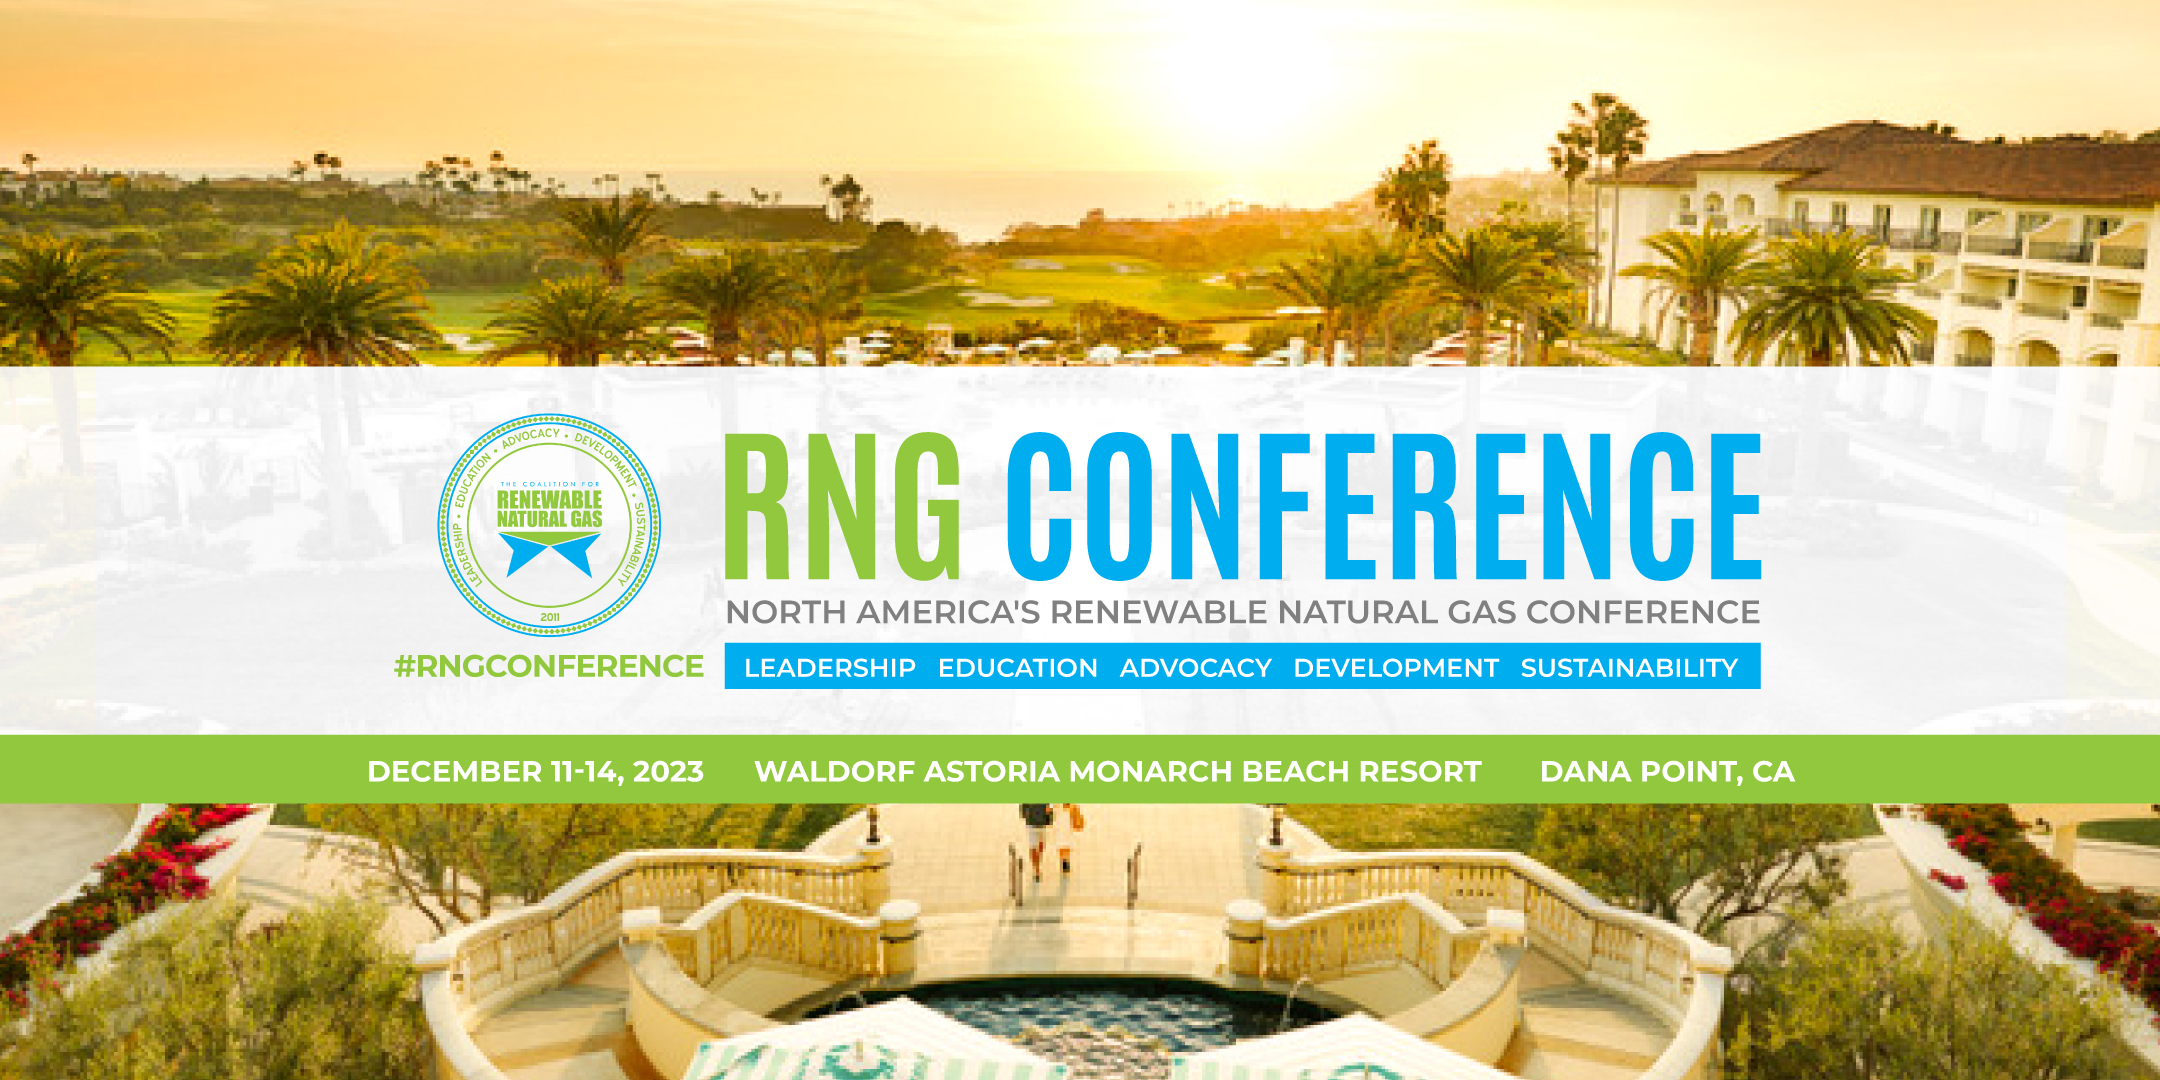 RNG CONFERENCE 2023